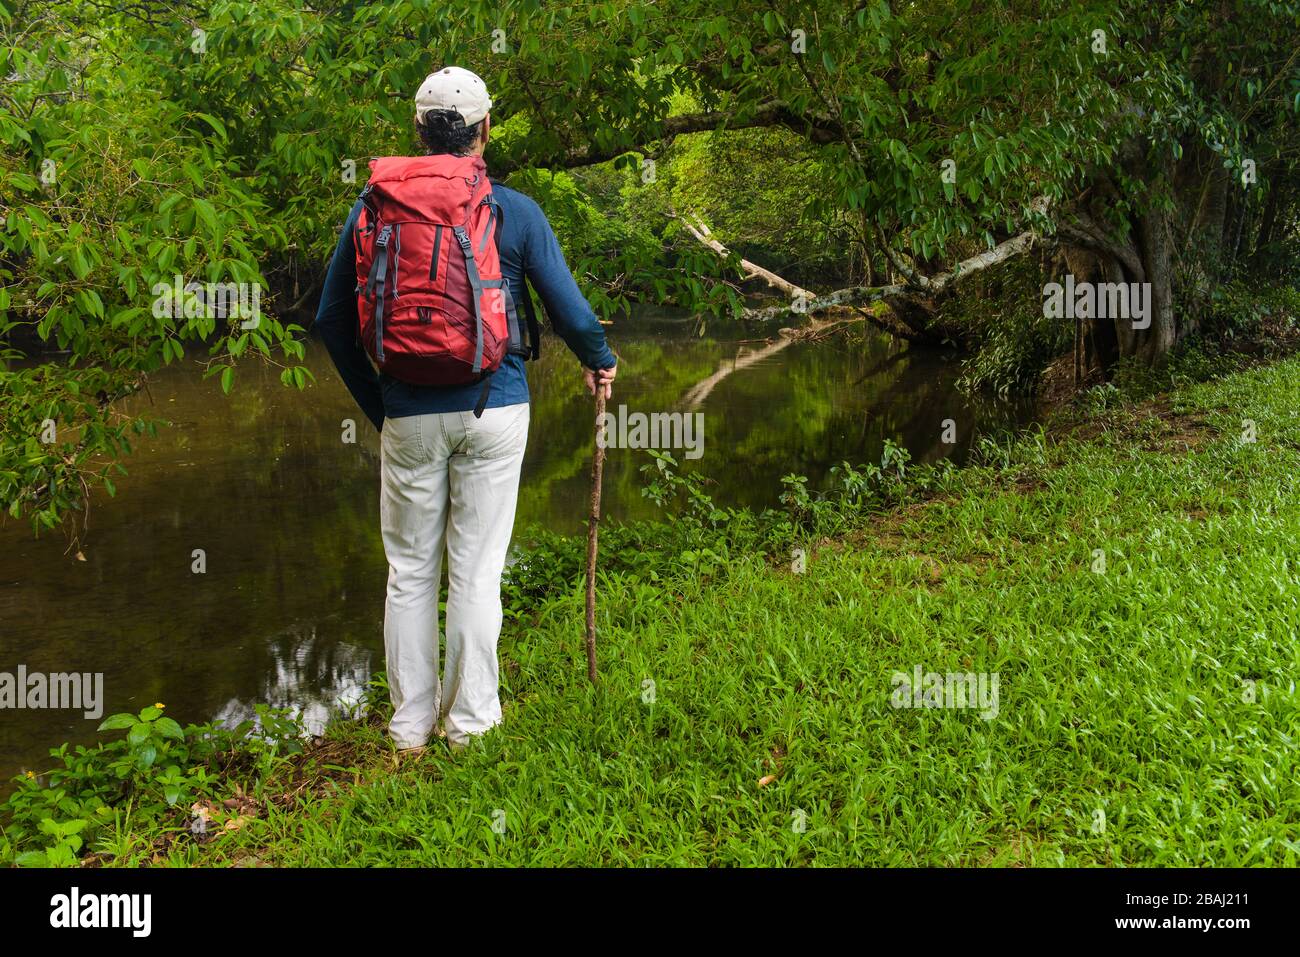 A view of a male ecotourist with a red backpack standing beside a freshwater creek in a tropical rainforest environment in Far North Queensland. Stock Photo